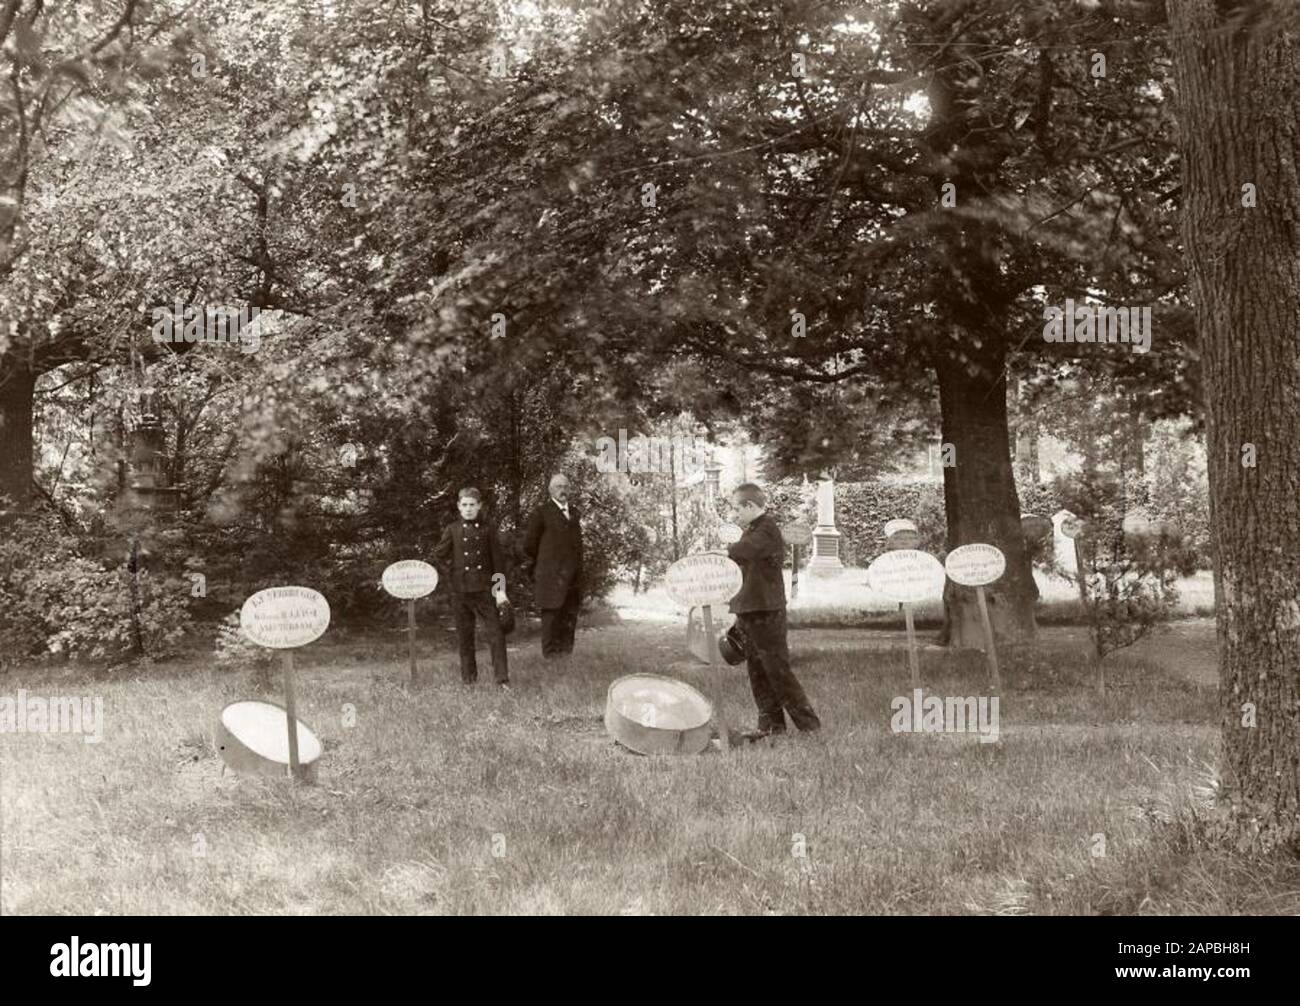 Home of education. In 1891 W.H. Suringar in Gorssel founded the Nederlandsch Mettray, a Protestant education home for non-criminal young people with behavioural problems. Photo 1916: the cemetery of the Nederlandsch Mettray in Gorssel. Stock Photo